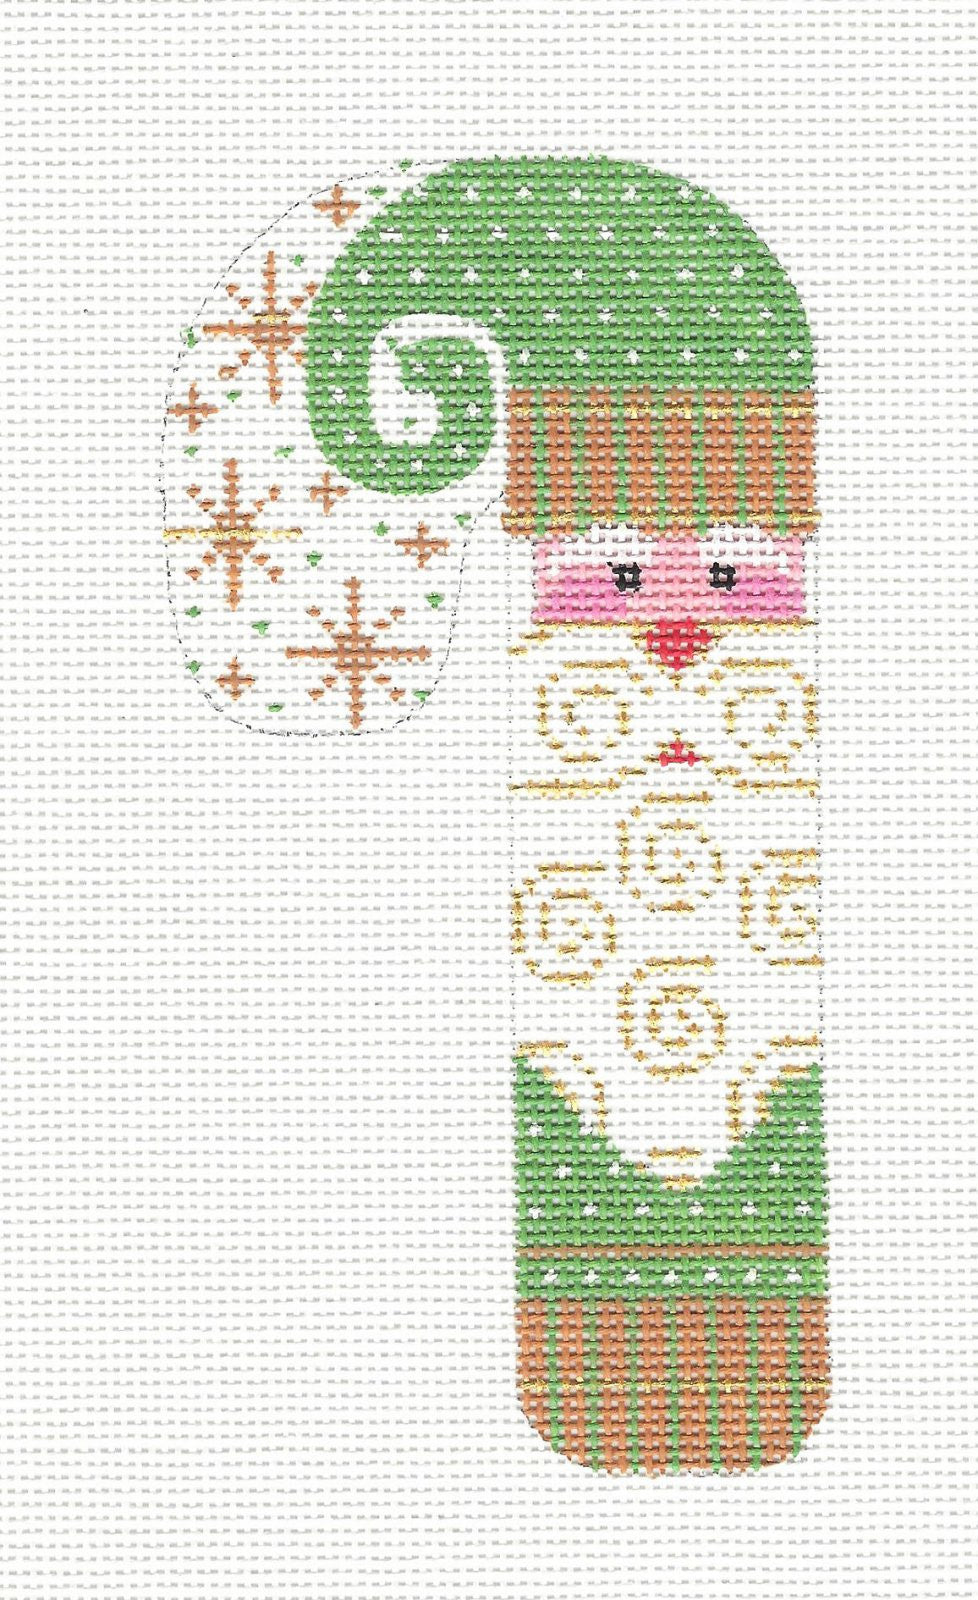 Candy Cane ~ Green and Gold Santa Medium Candy Cane Ornament on handpainted Needlepoint Canvas by Danji Designs